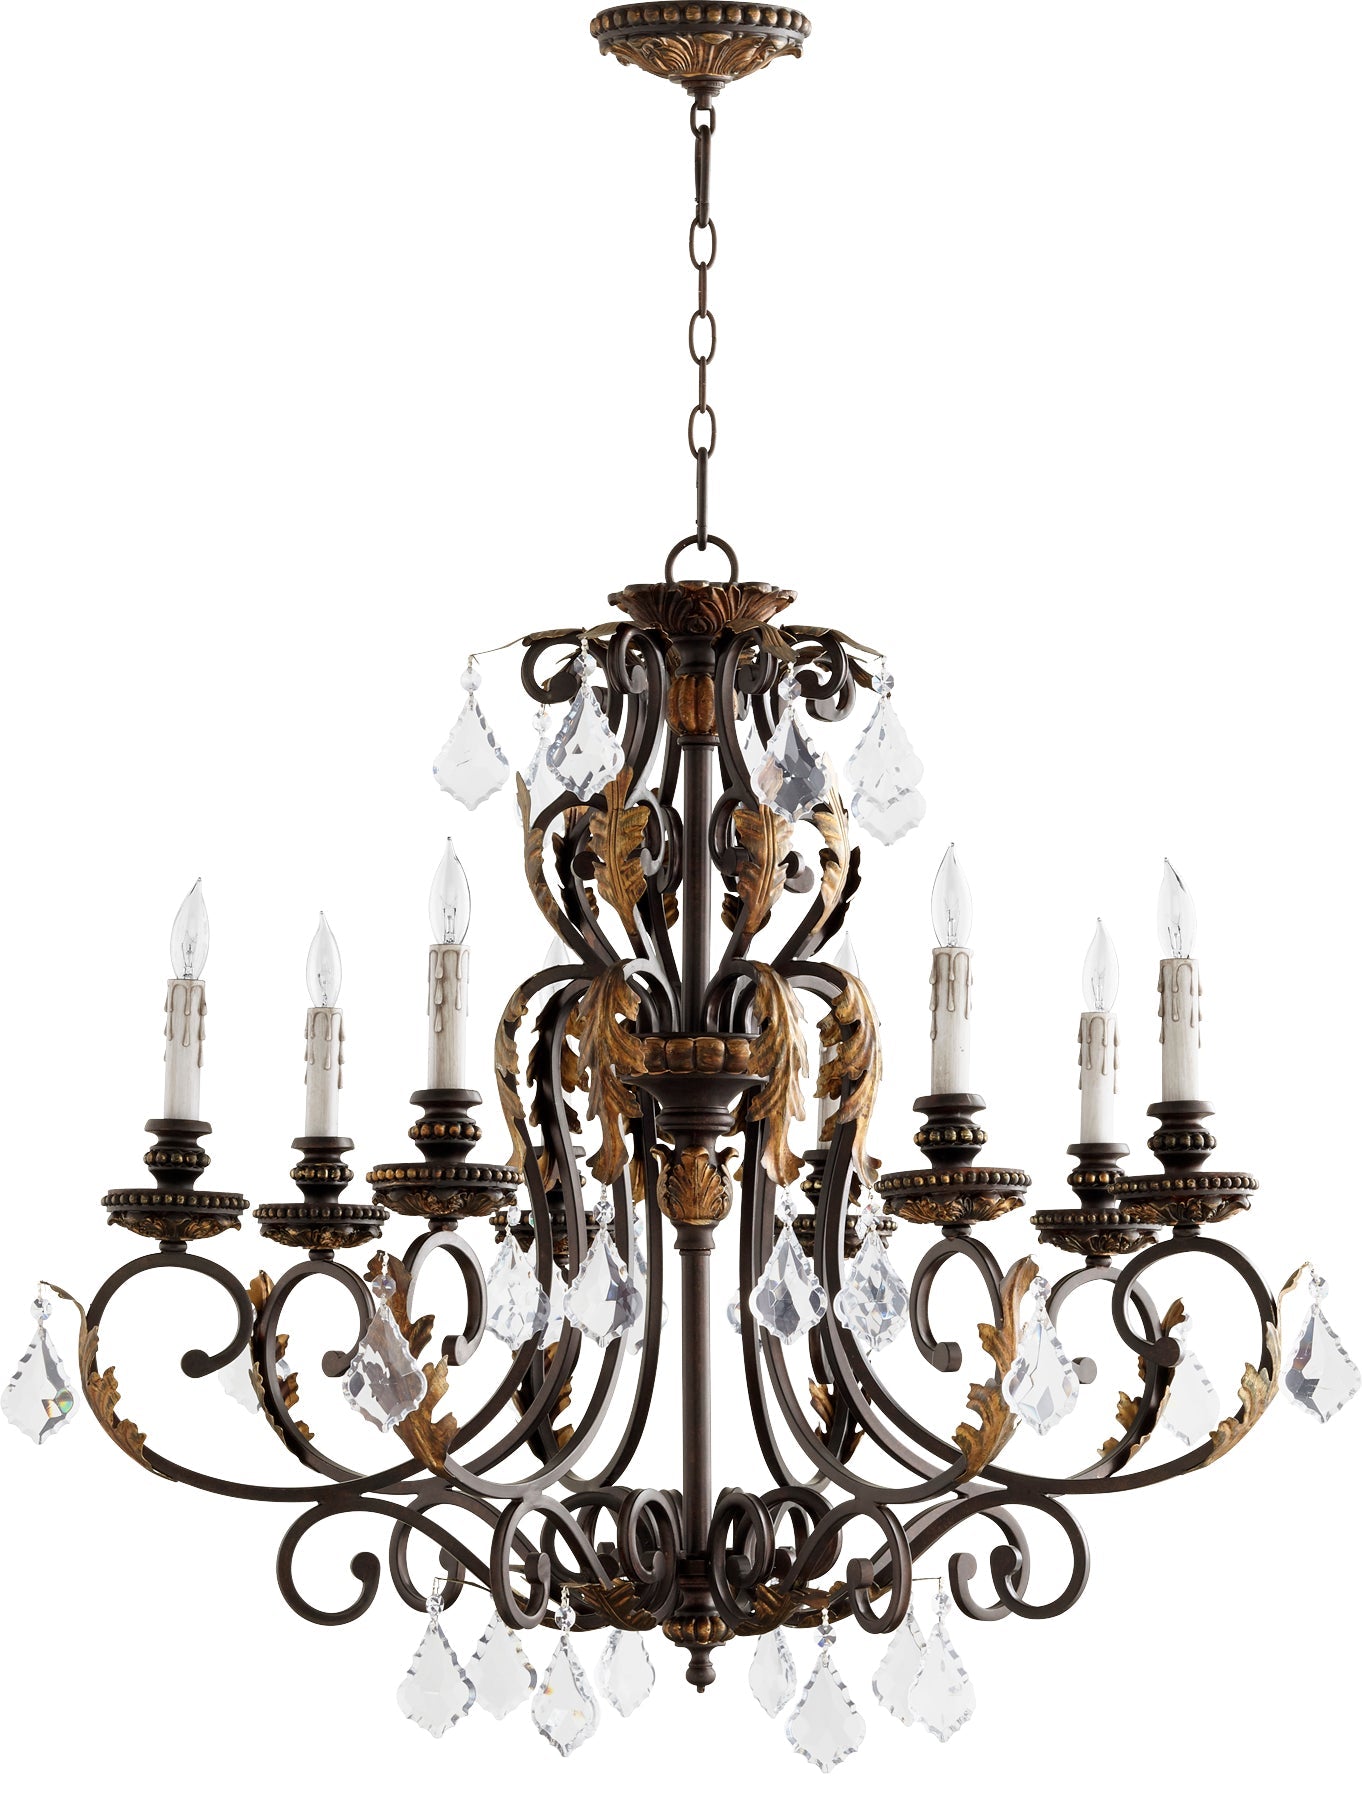 Quorum Rio Salado 6157-8-44 Chandelier - Toasted Sienna With Mystic Silver